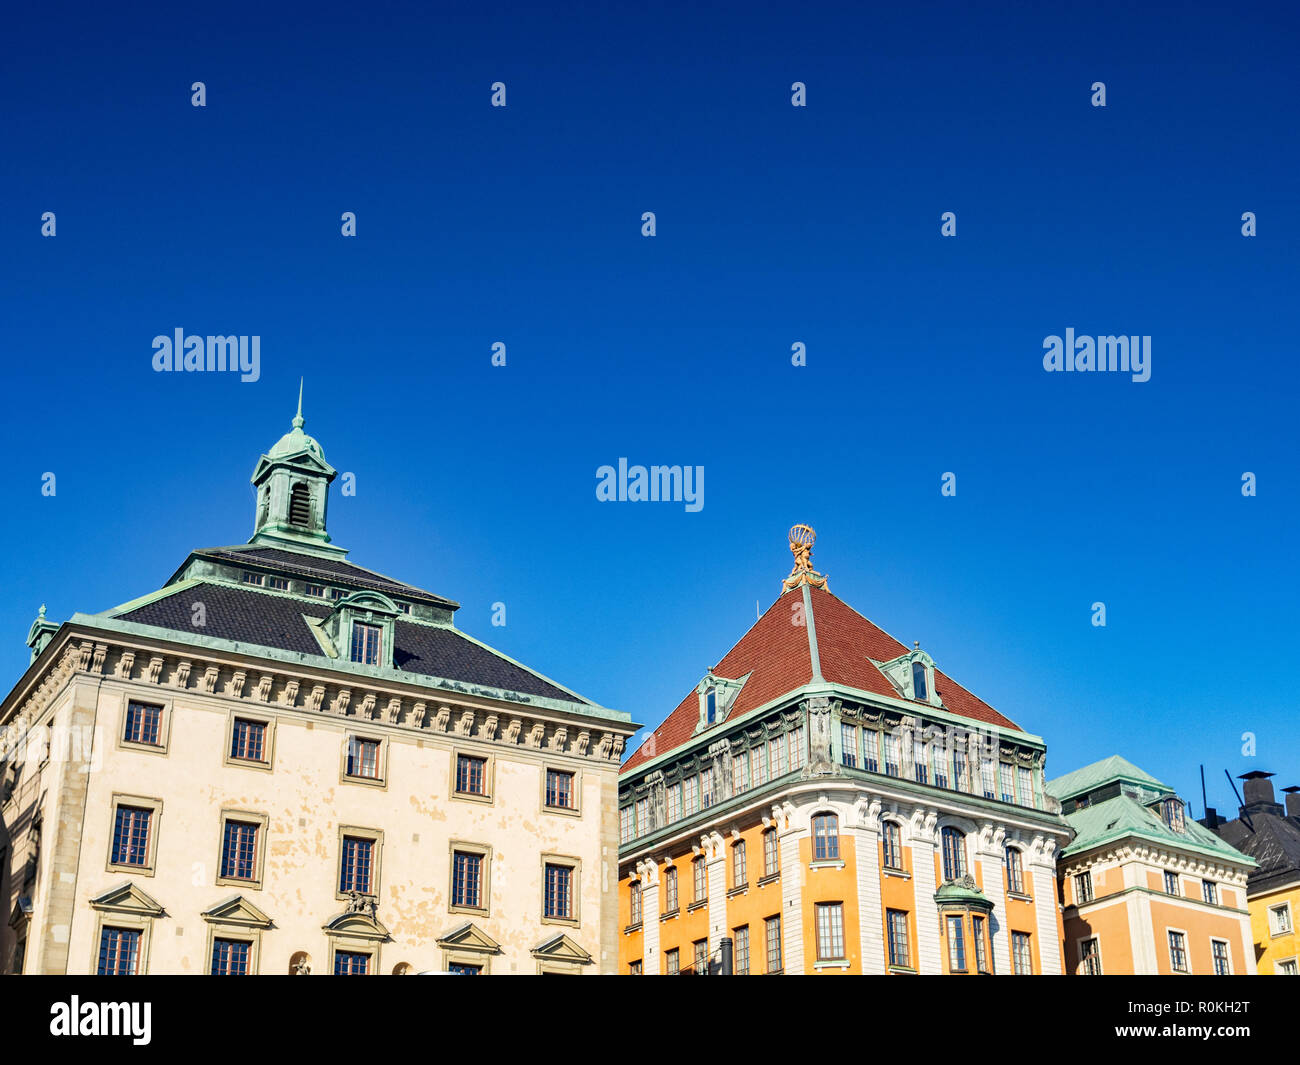 18 September 2018: Stockholm, Sweden - Traditional buildings on the waterfront of Stadsholmen, in Gamla stan, under deep clear blue sky. Stock Photo